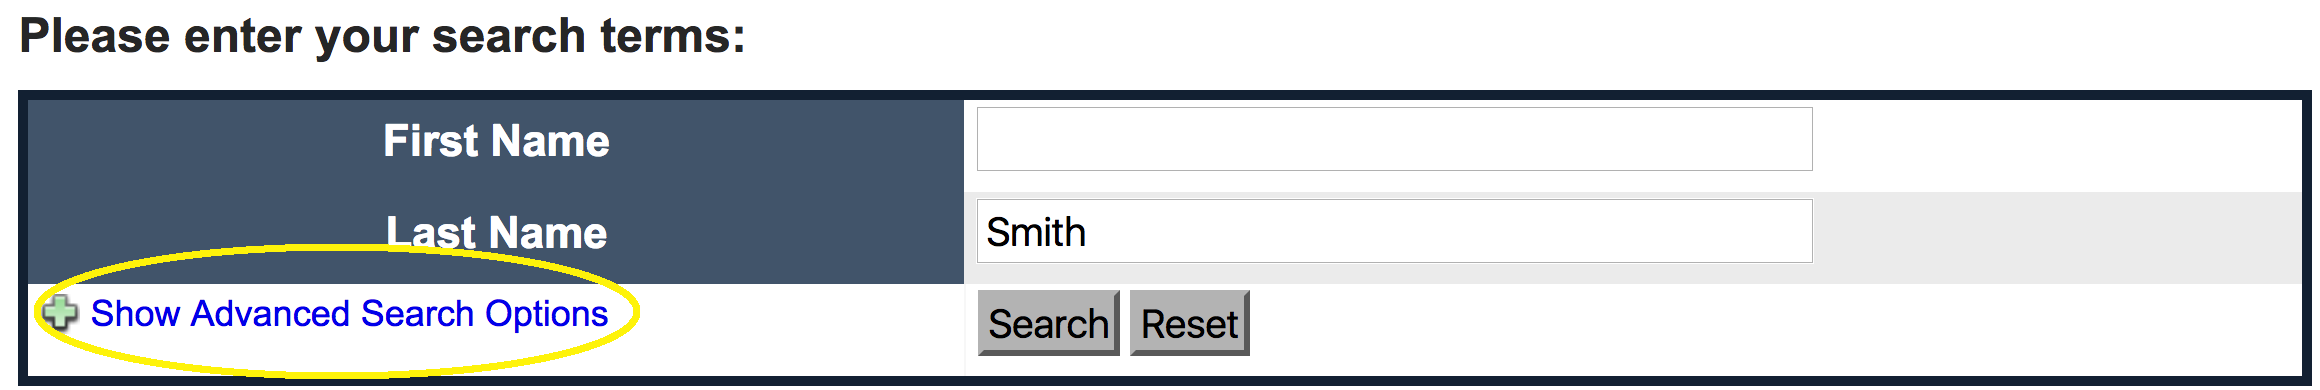 highlight around "show advanced search options" in search field